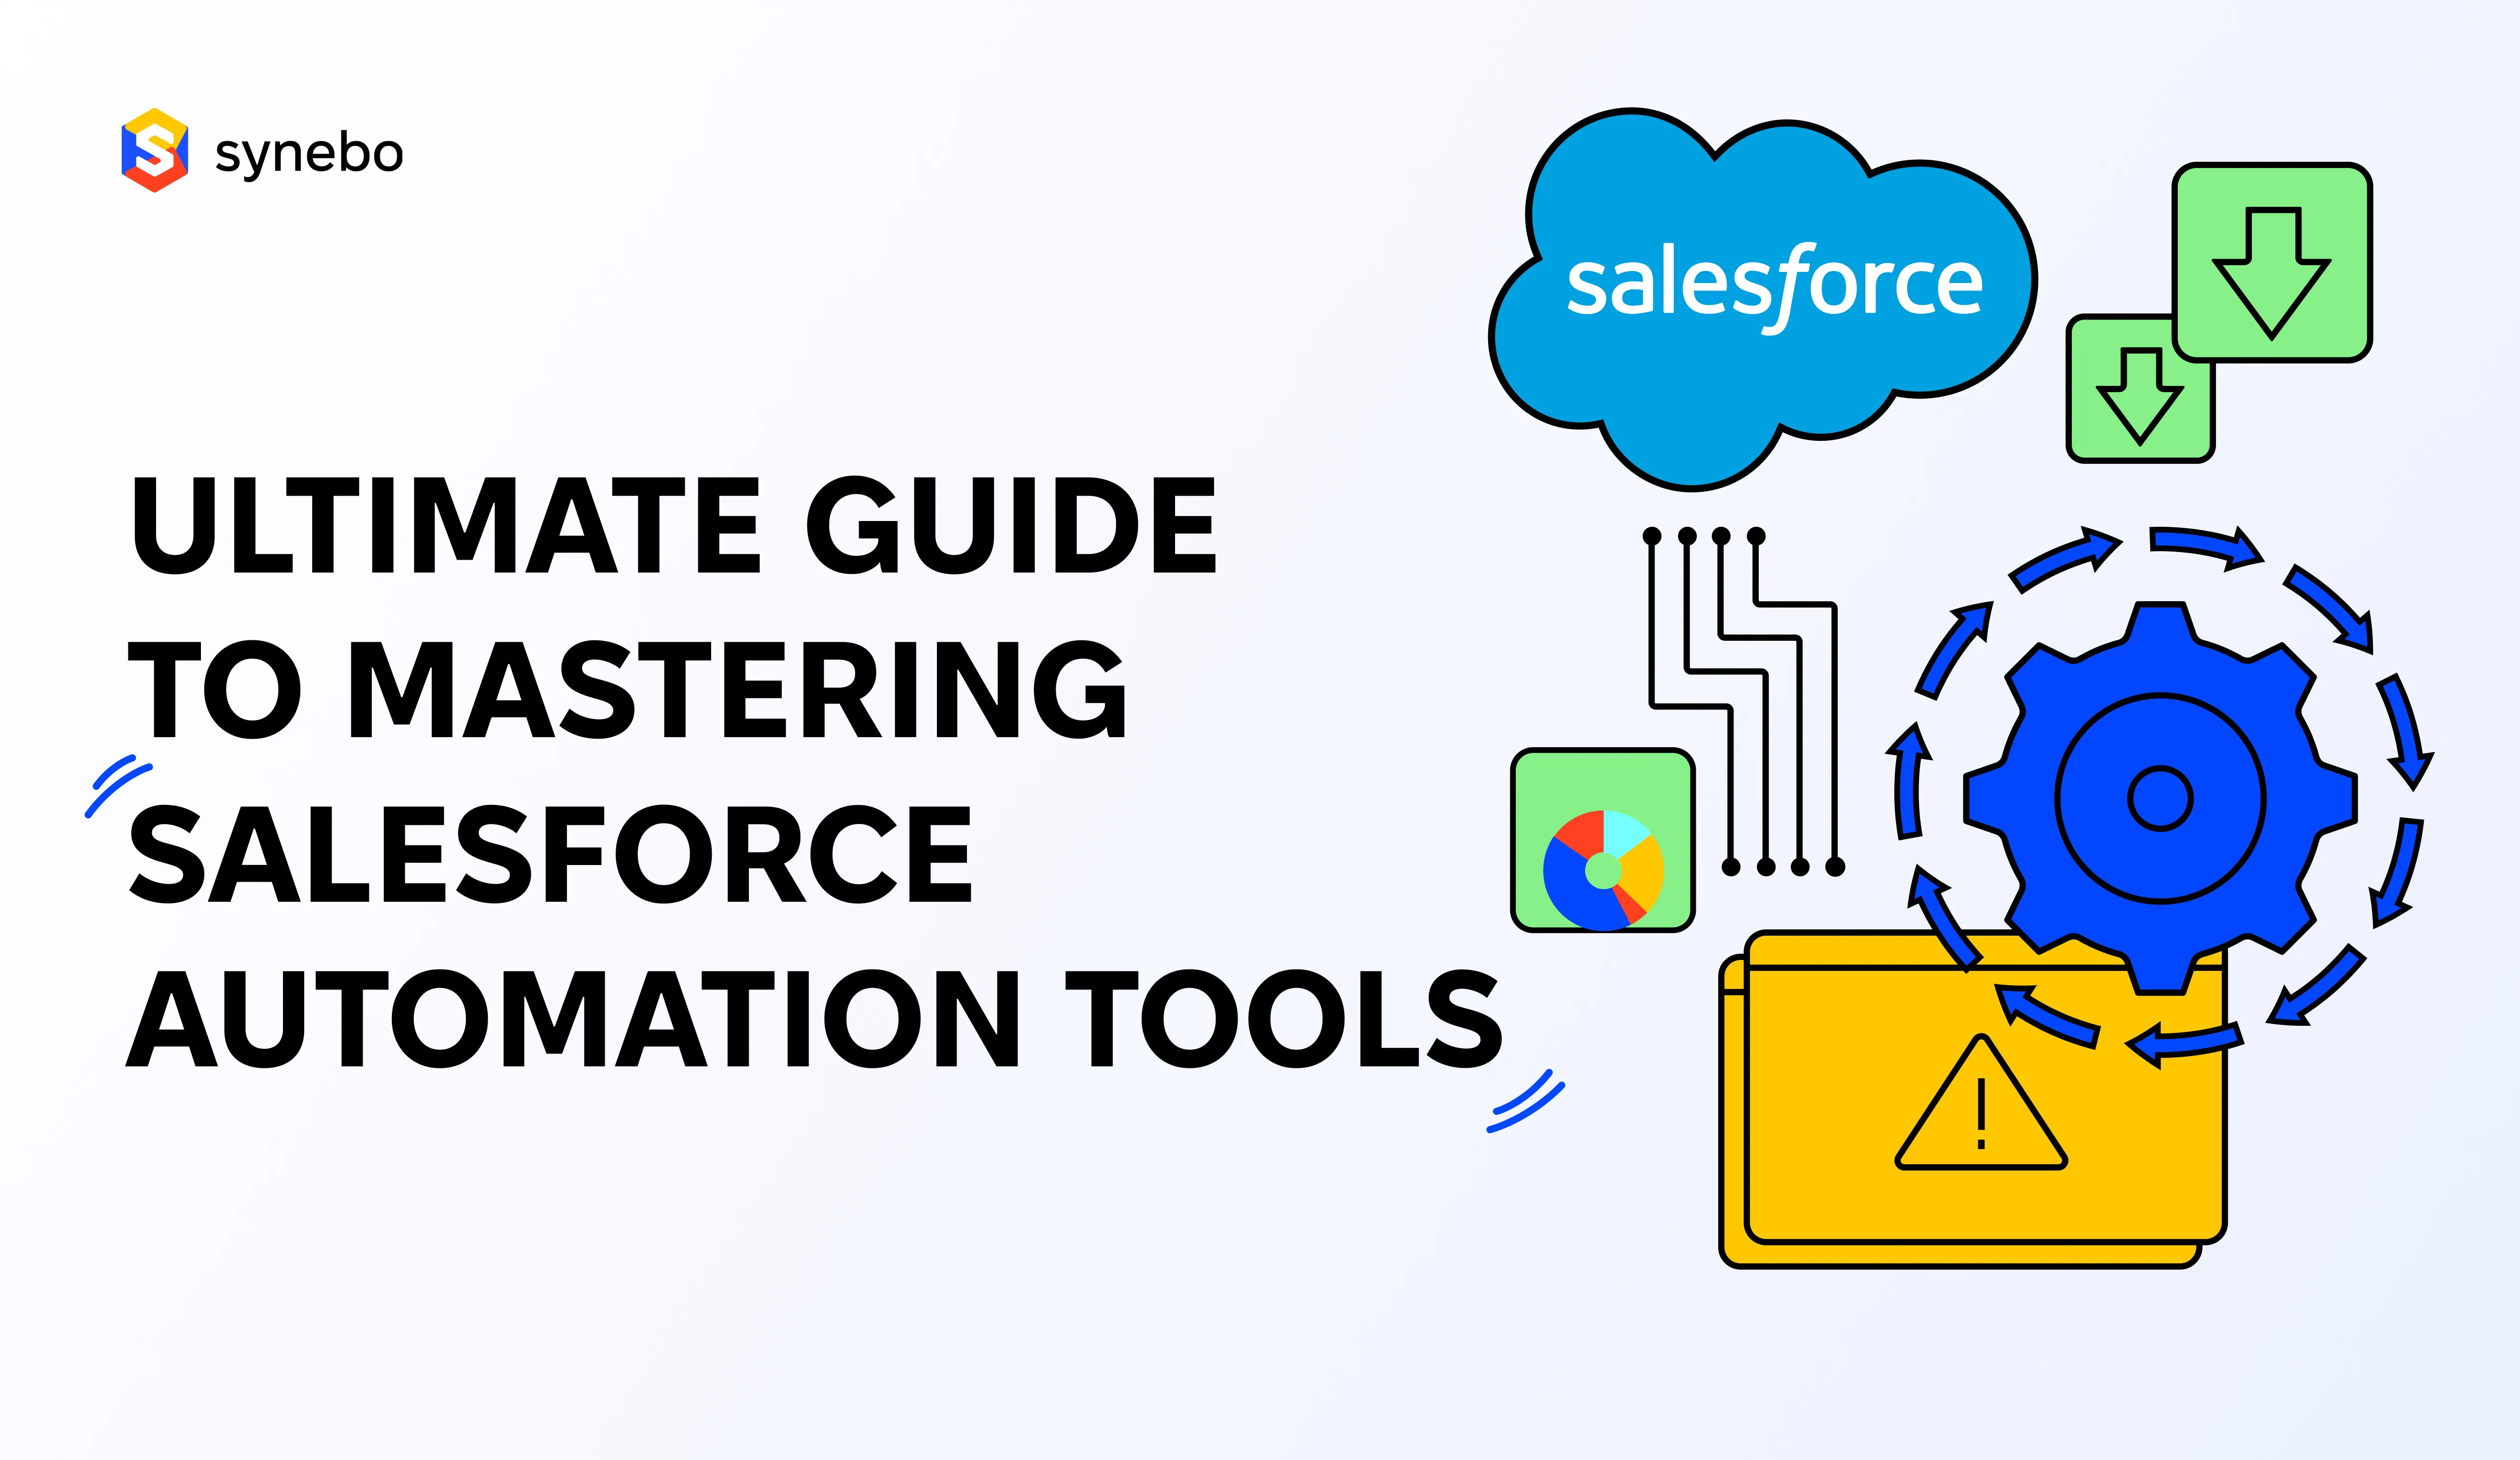 Ultimate Guide to Mastering Salesforce Automation Tools